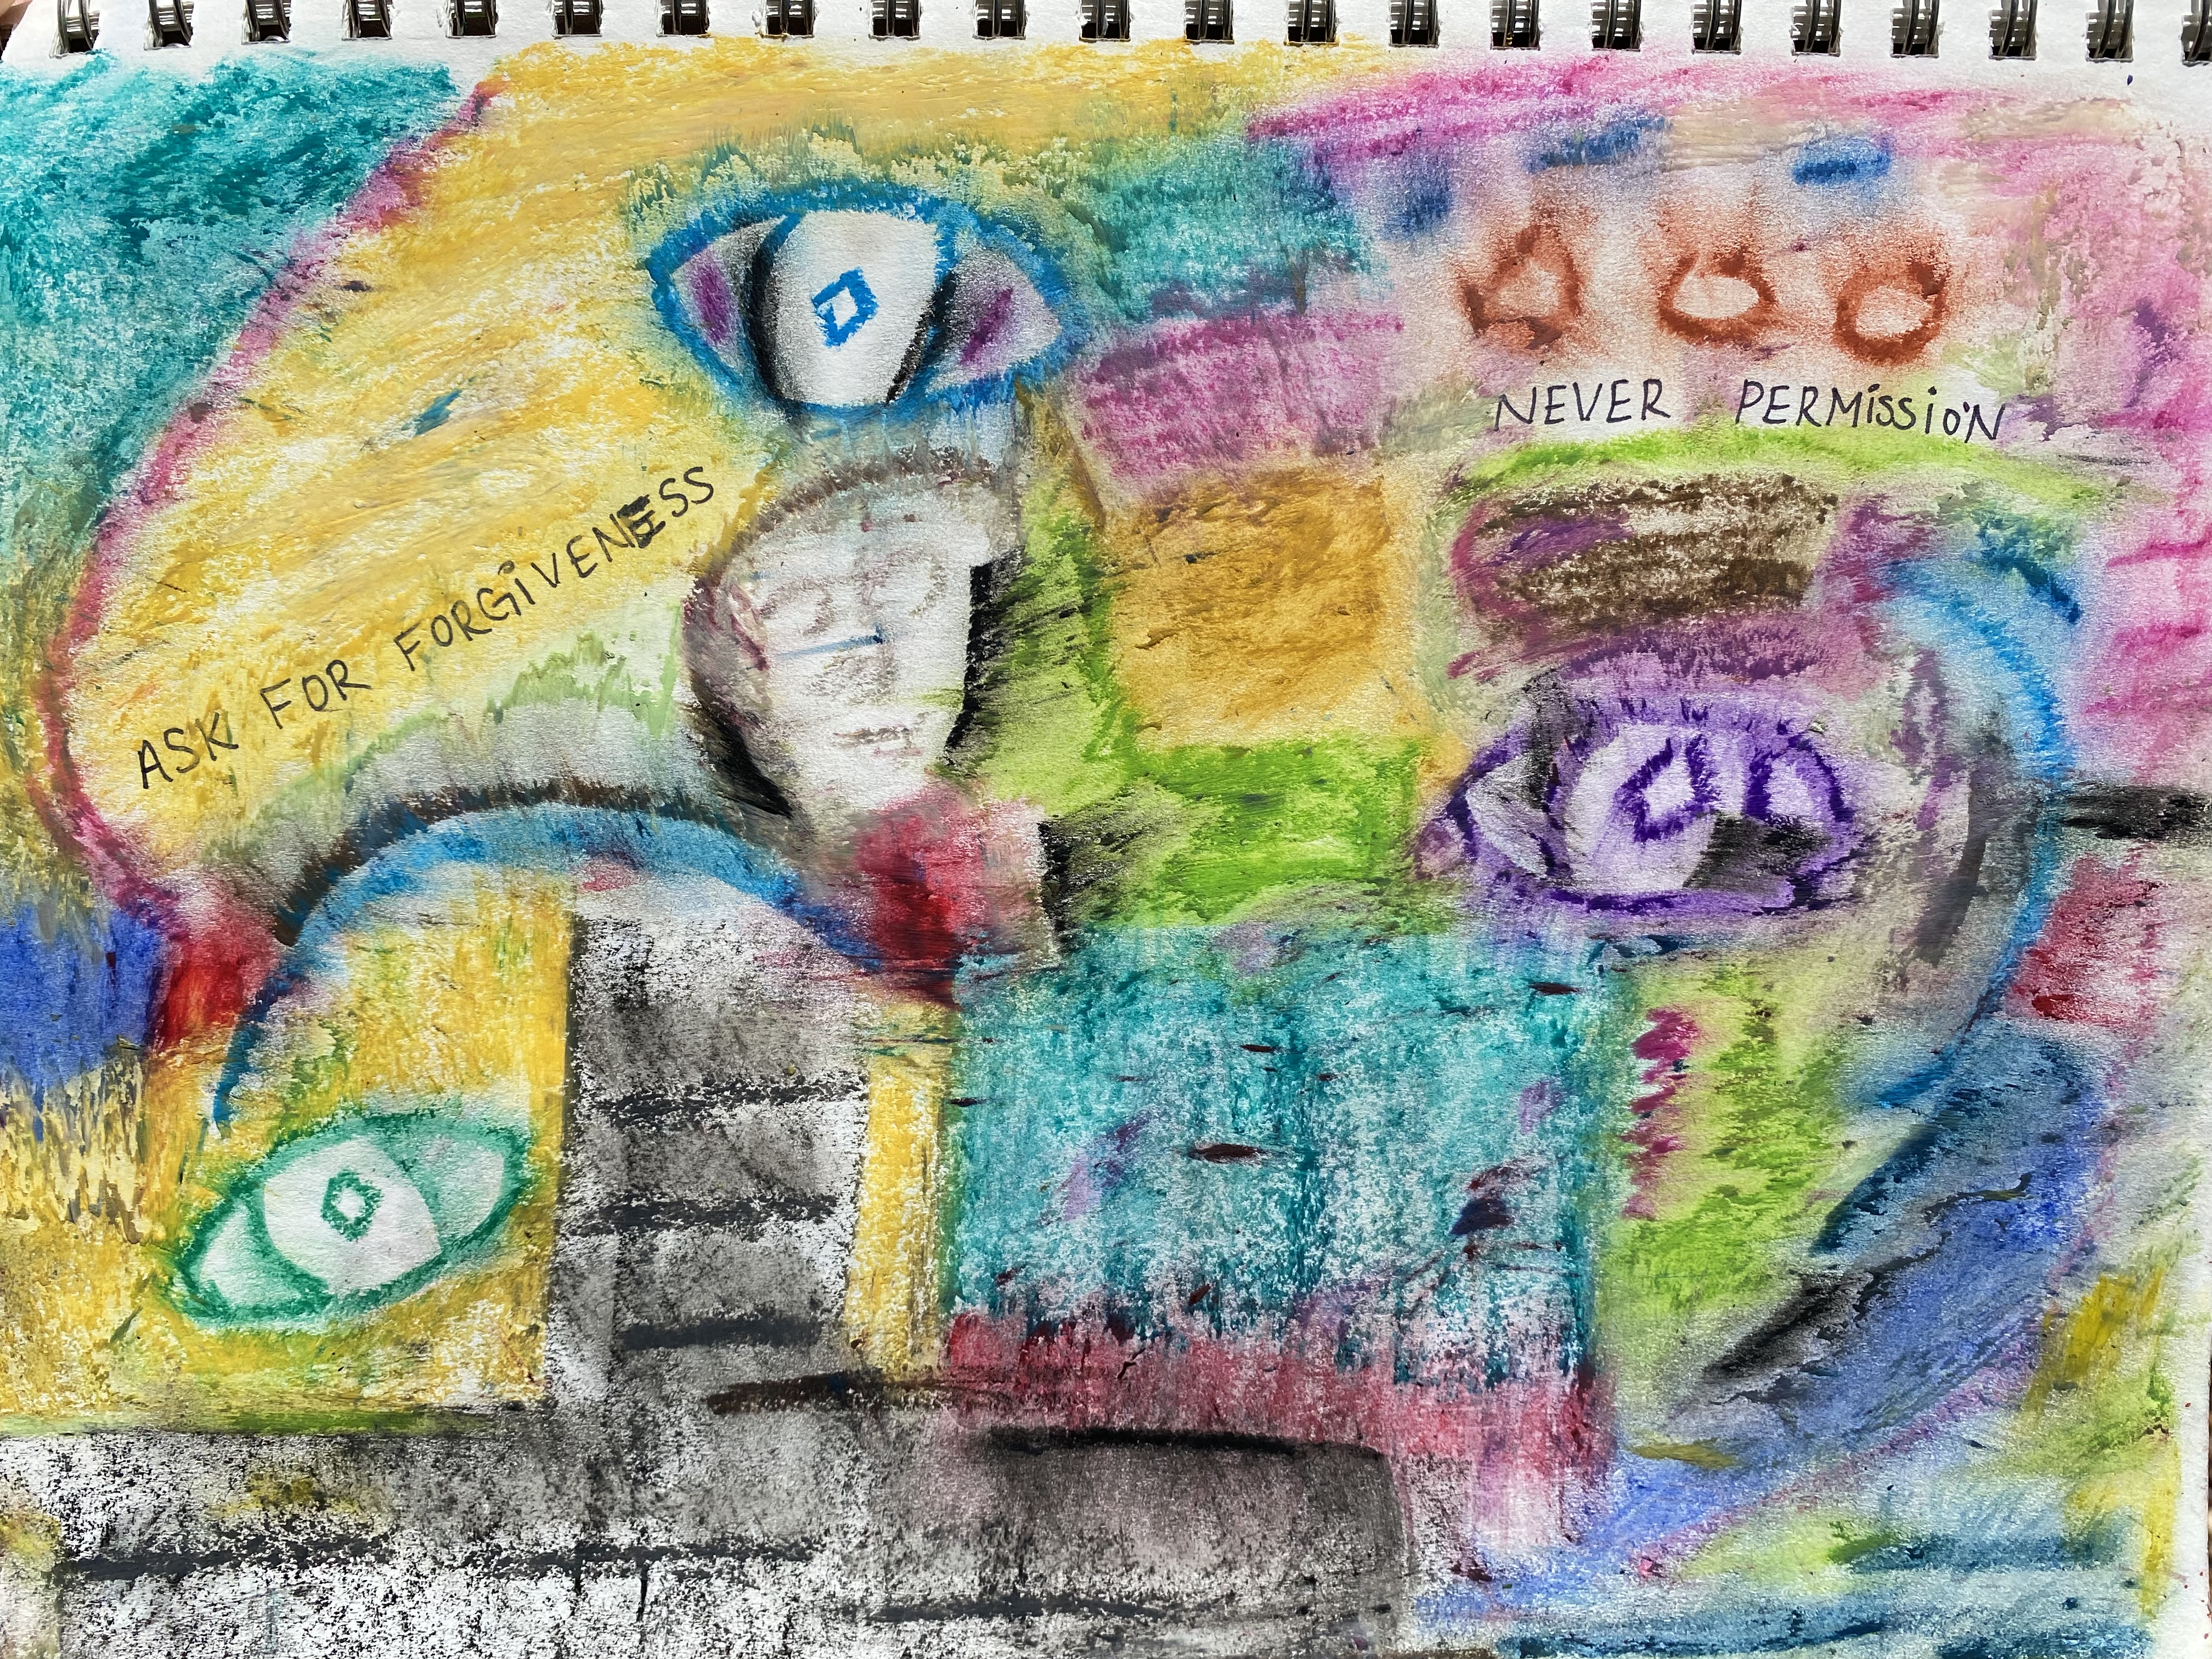 vibrant oil pastel with three eyes. text states: 'ask for forgiveness never permission.'